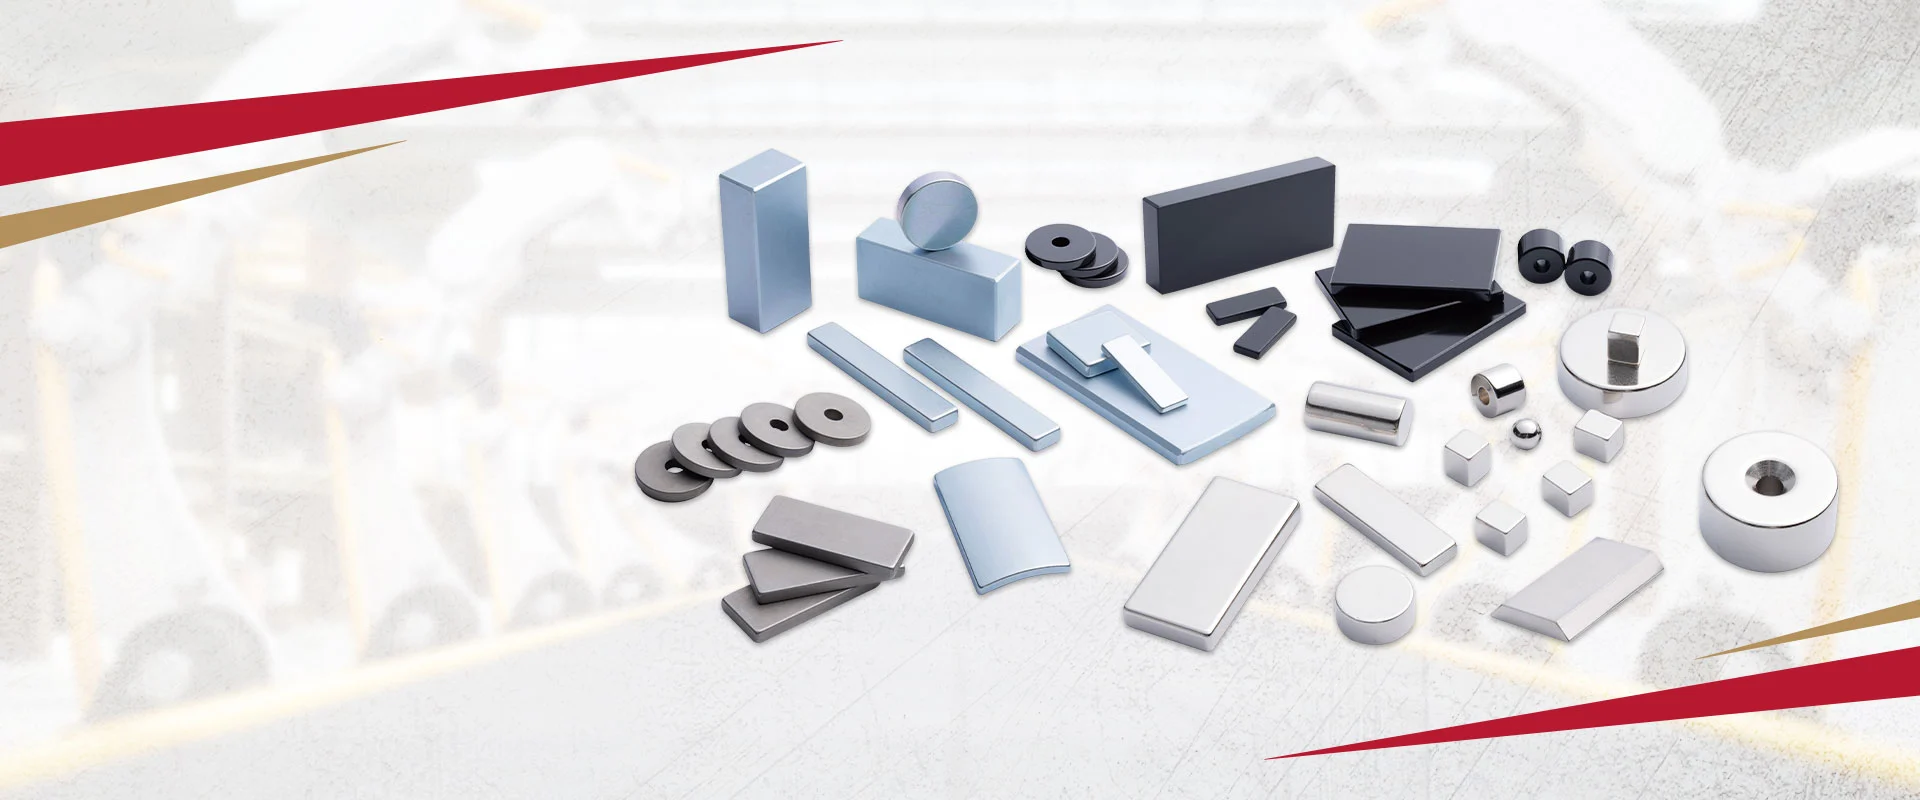 Custom NdFeB Magnets Empower your world with Ketian's superior range of NdFeB magnets and magnet assemblies.